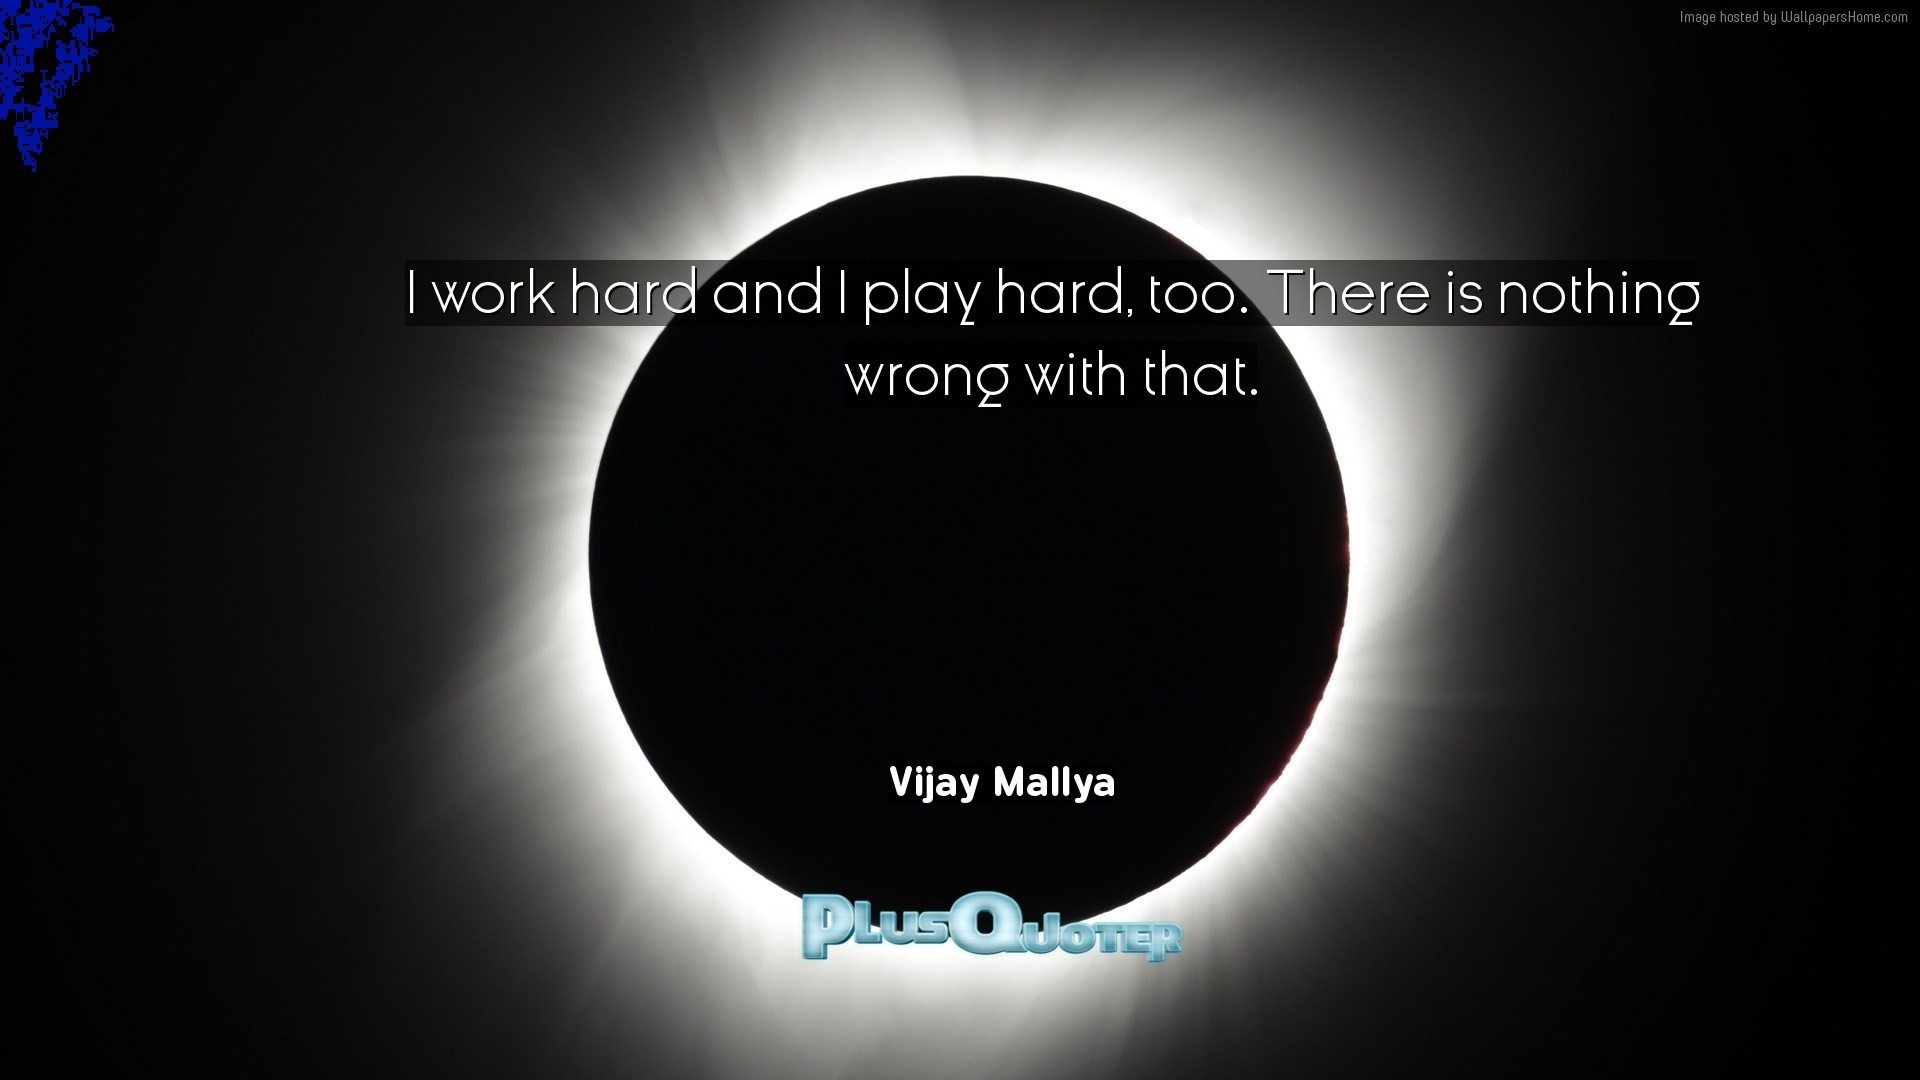 1920x1080 Download Wallpaper with inspirational Quotes- "I work hard and I play hard,  too